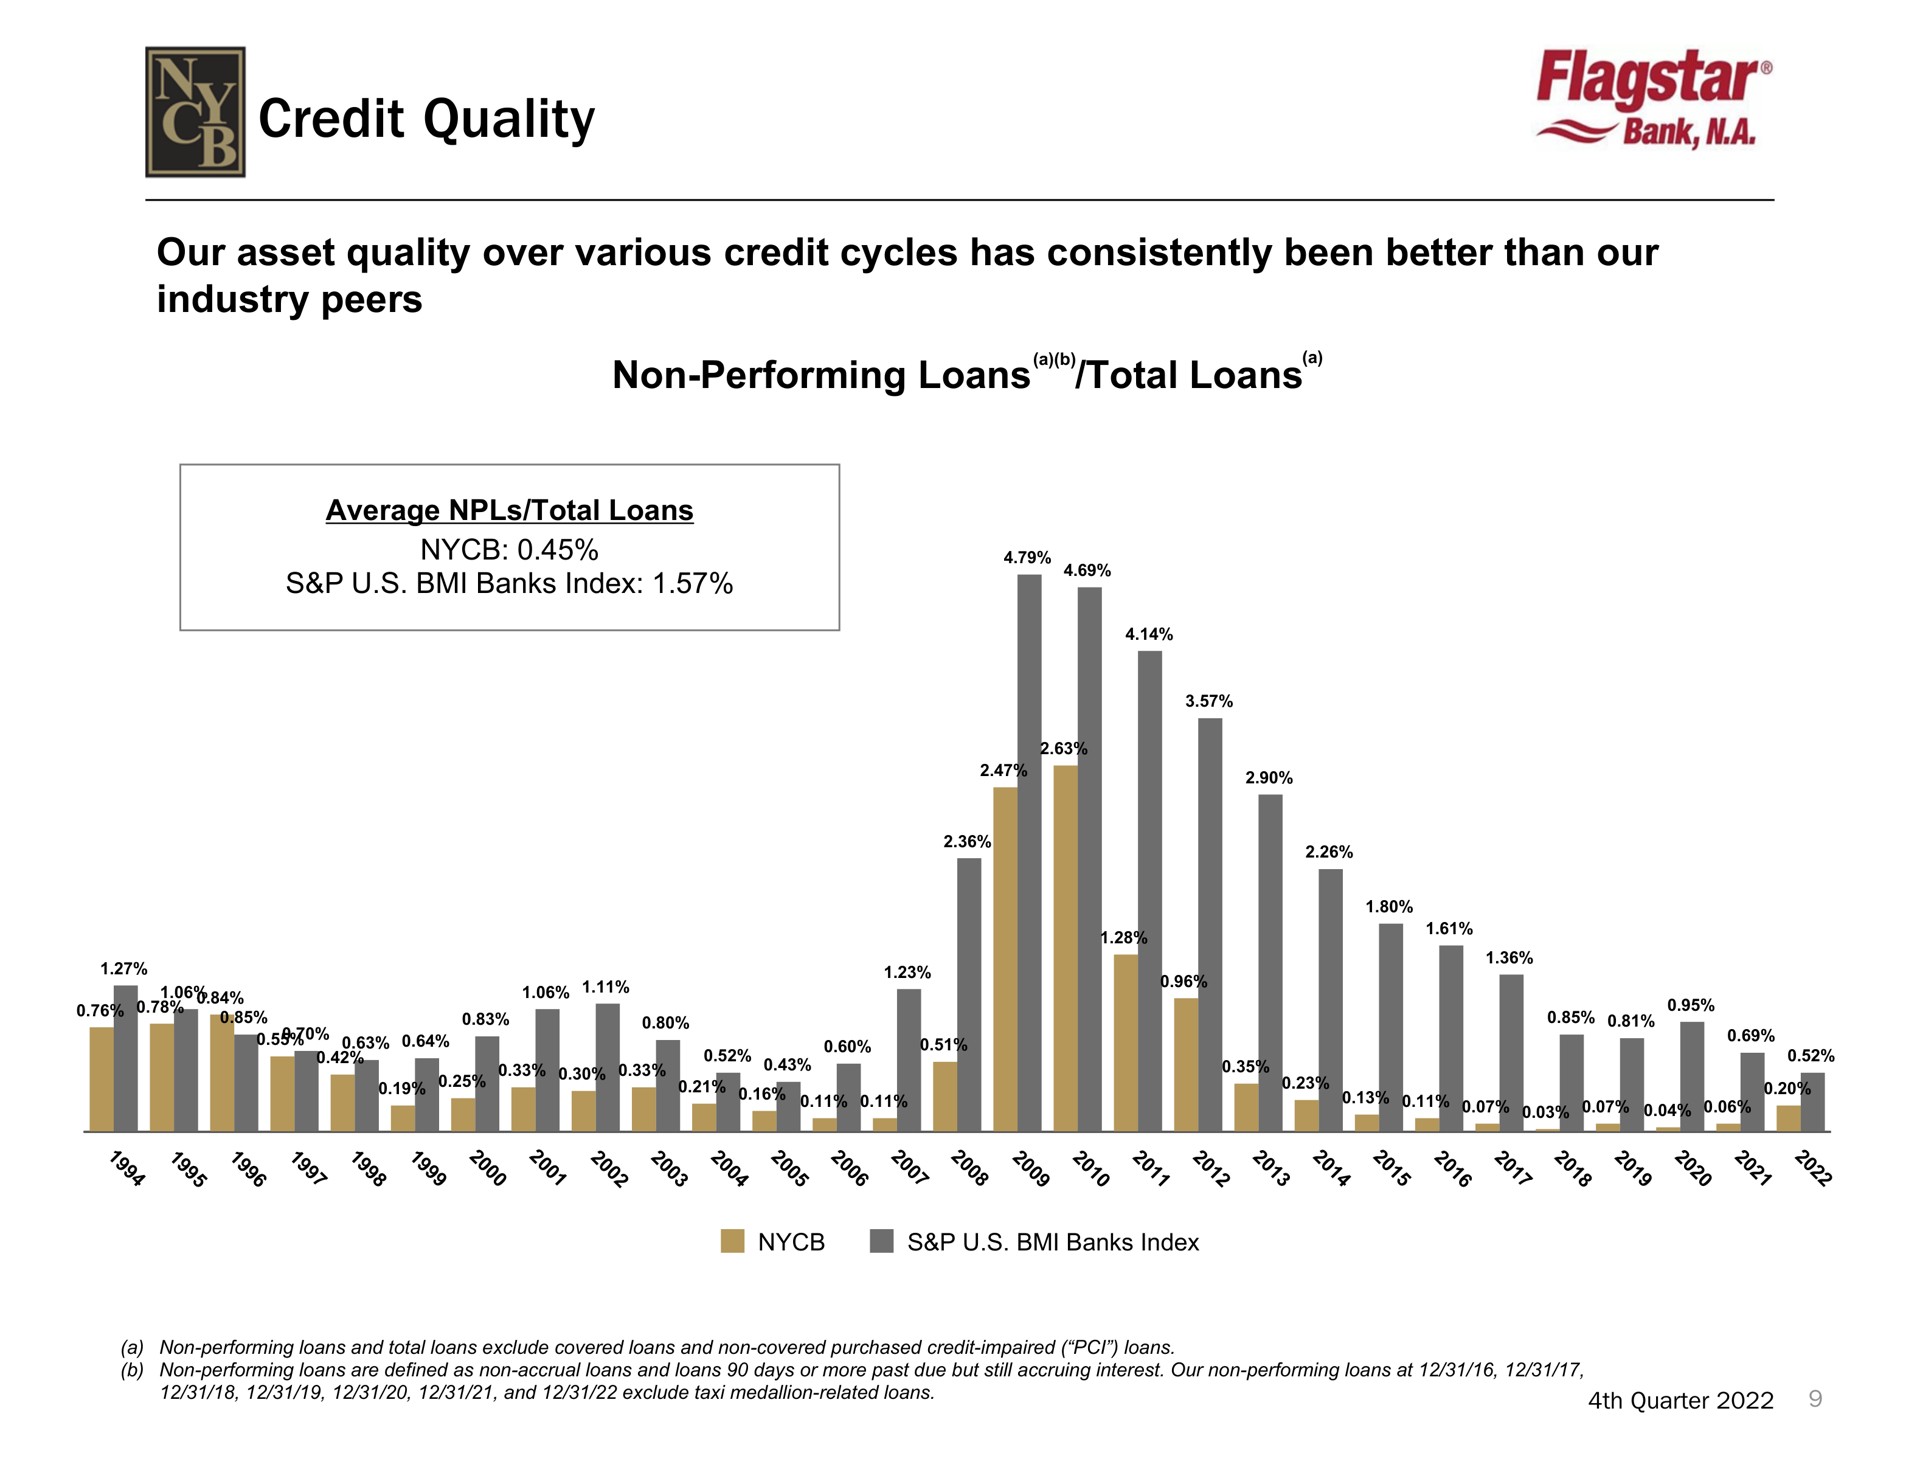 credit quality bank non performing loans total loans | New York Community Bancorp